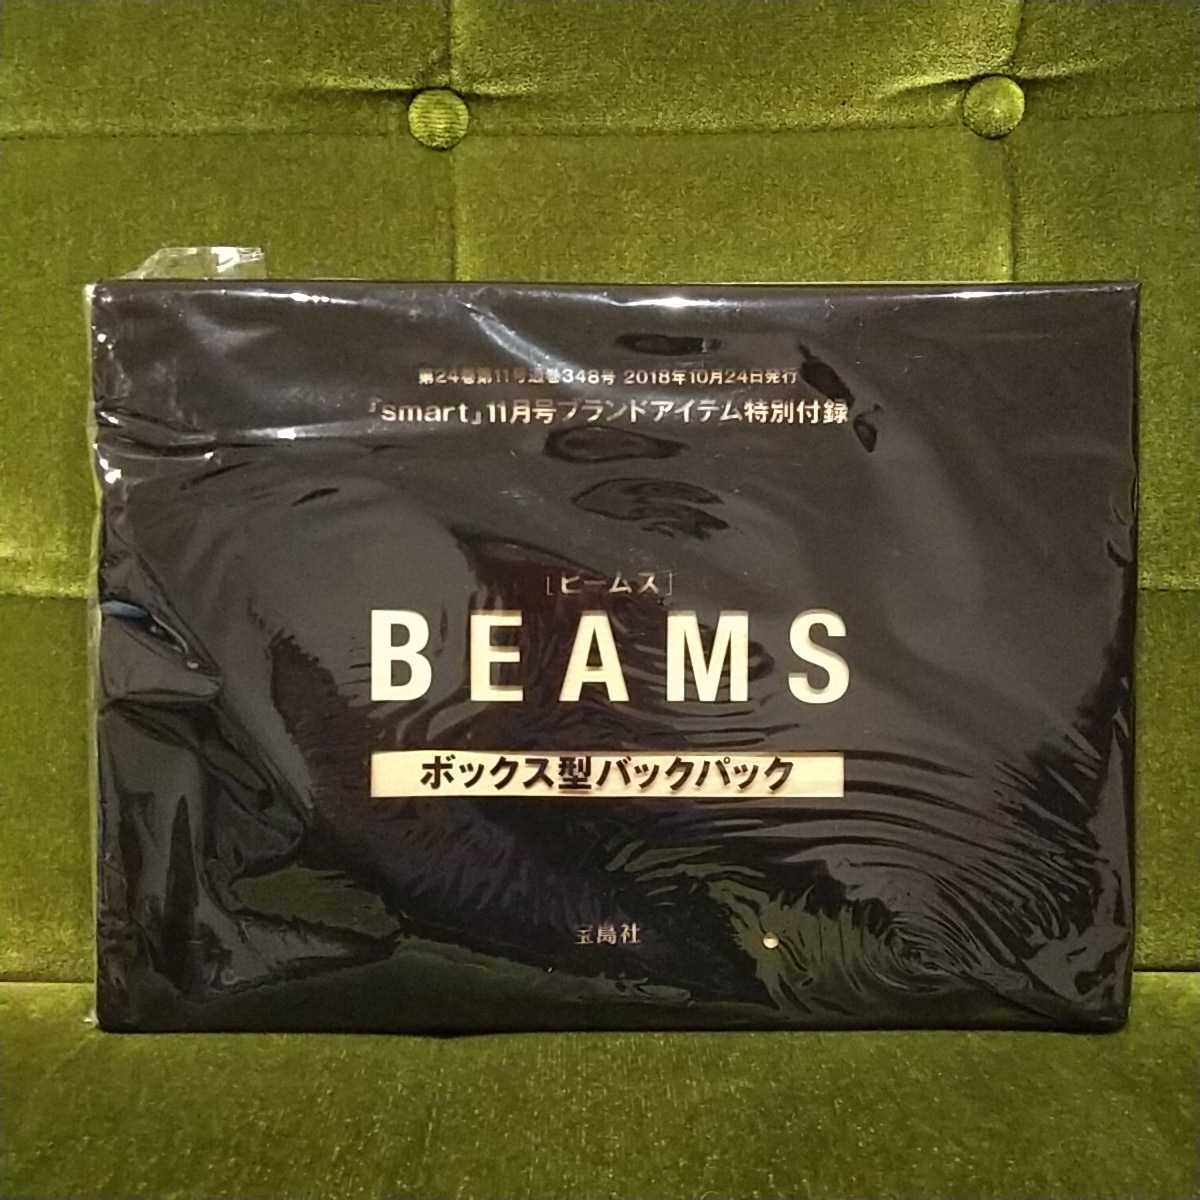 [ new goods unopened ]BEAMS box type backpack smart 2018 year 11 month number brand item special appendix * "Treasure Island" company / Beams / rucksack 